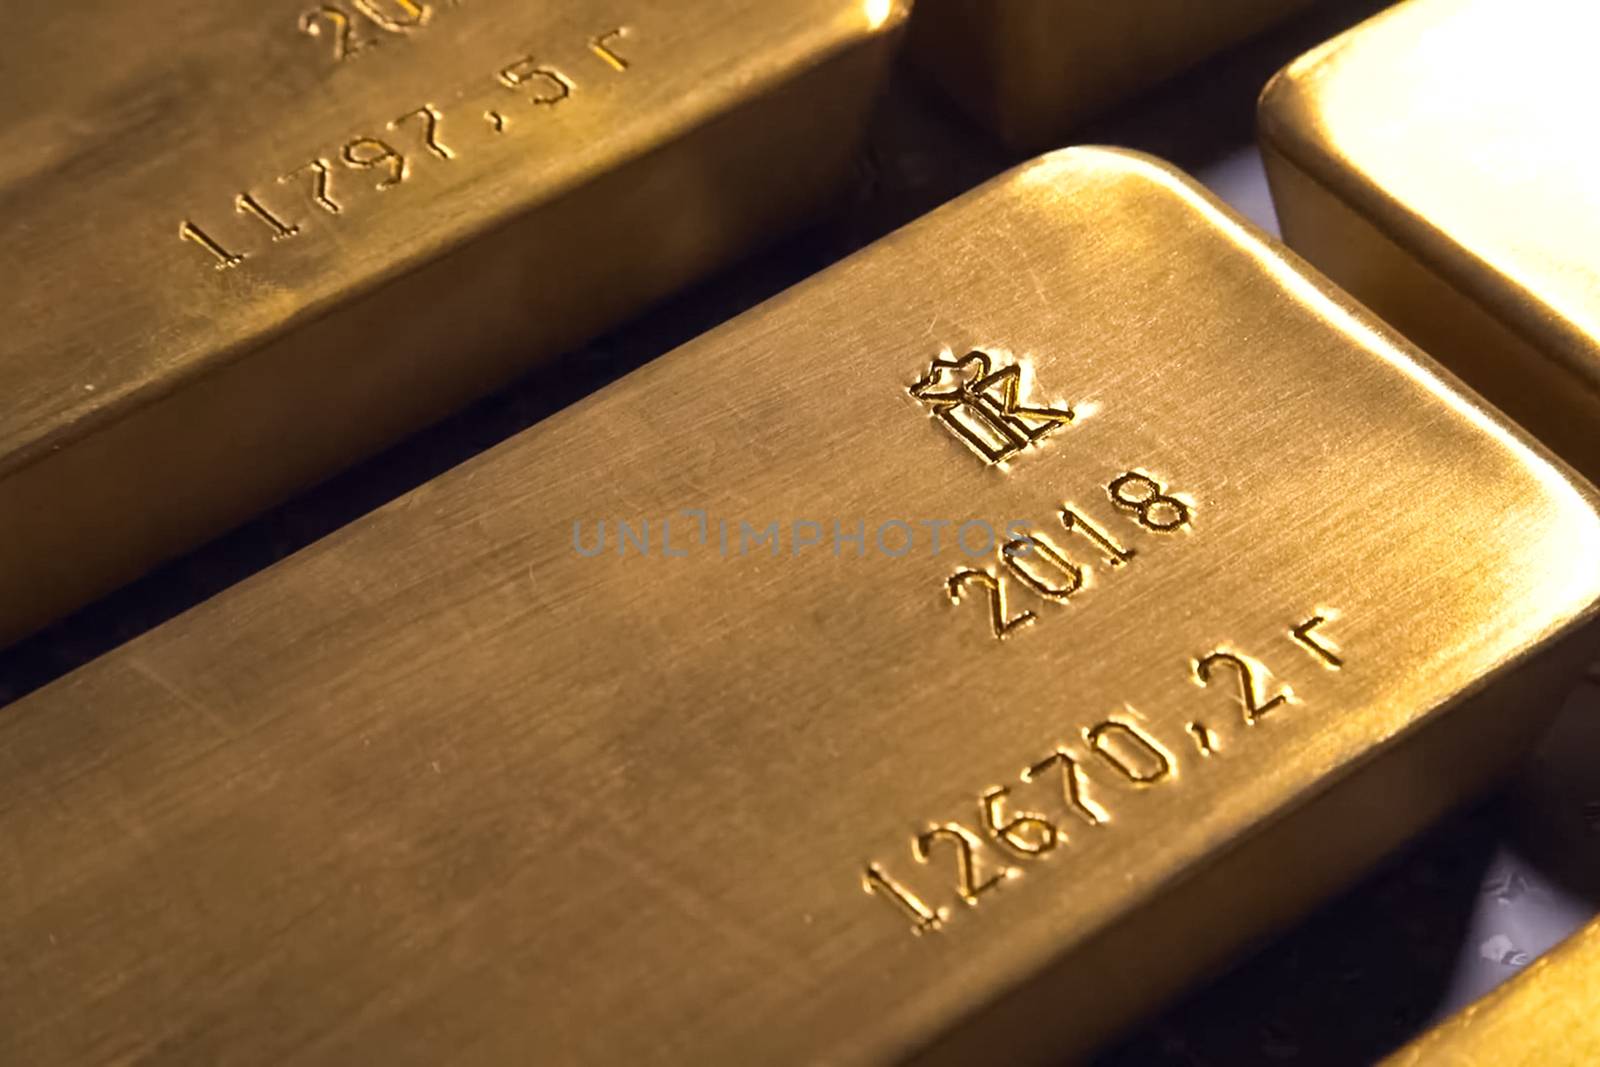 Gold bars. Gold in the form of bullion.